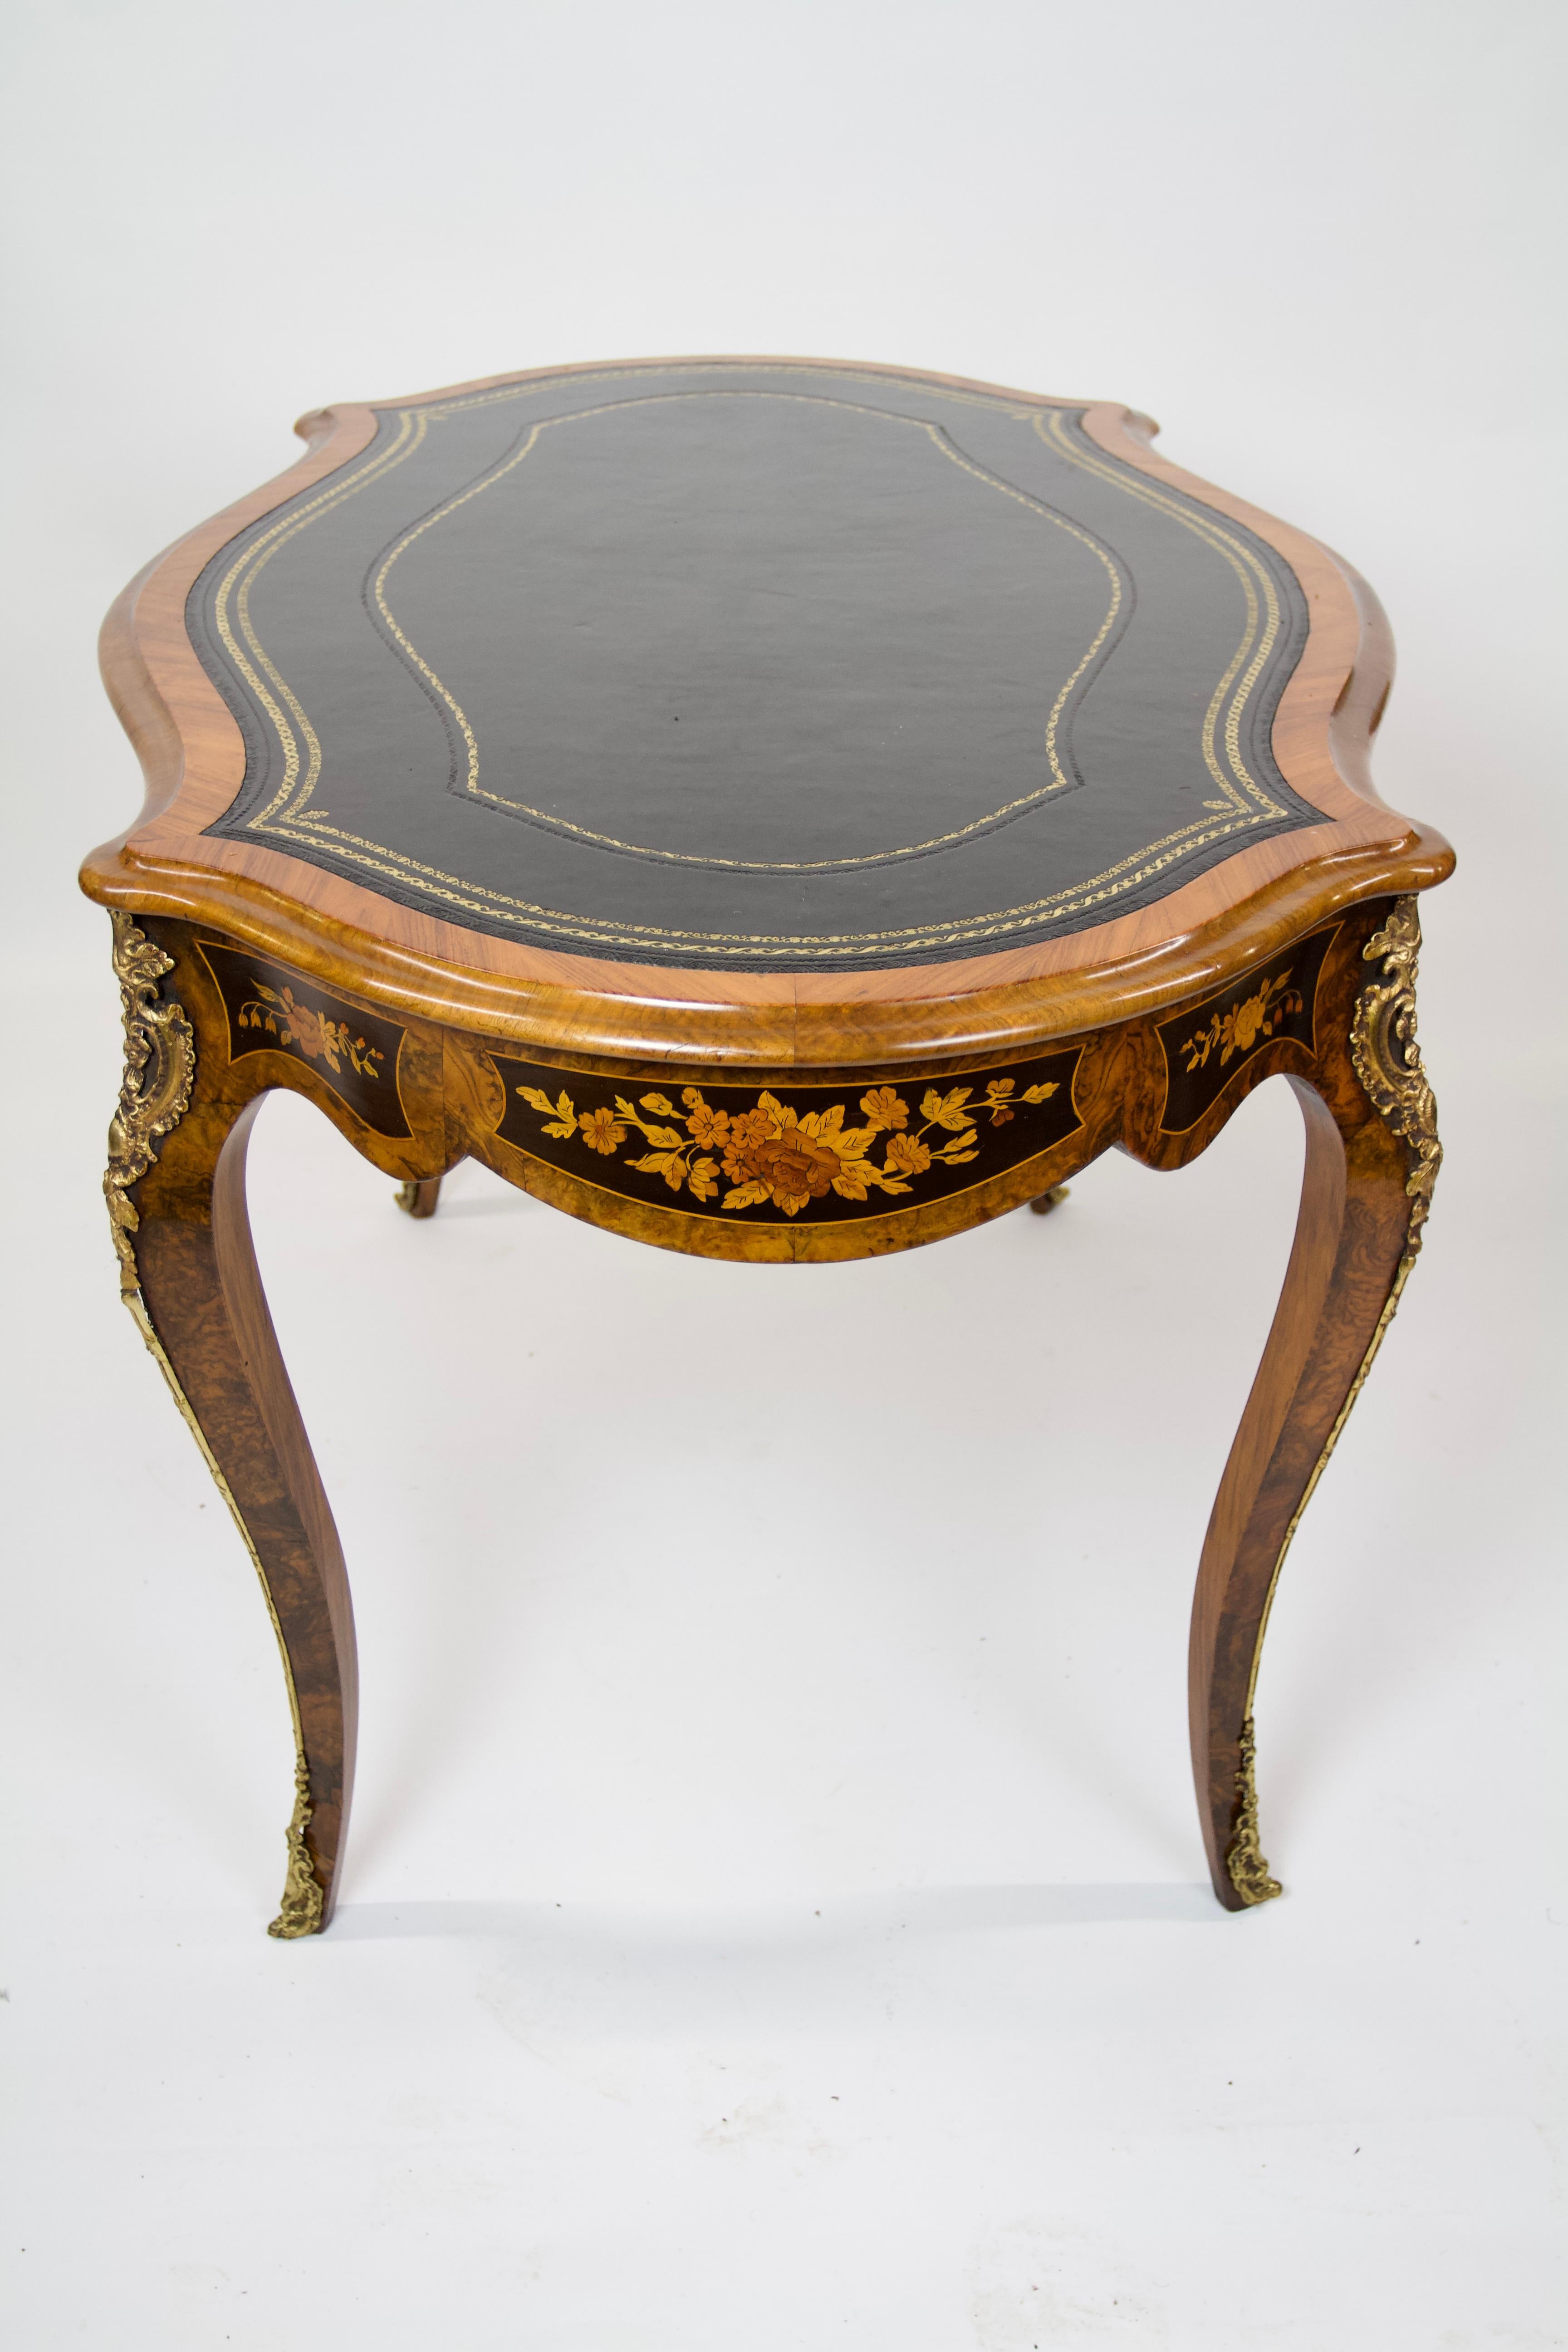 Louis XVI Fine C19TH  French Kingwood & Marquetry Bureau Plat /Writing Table For Sale